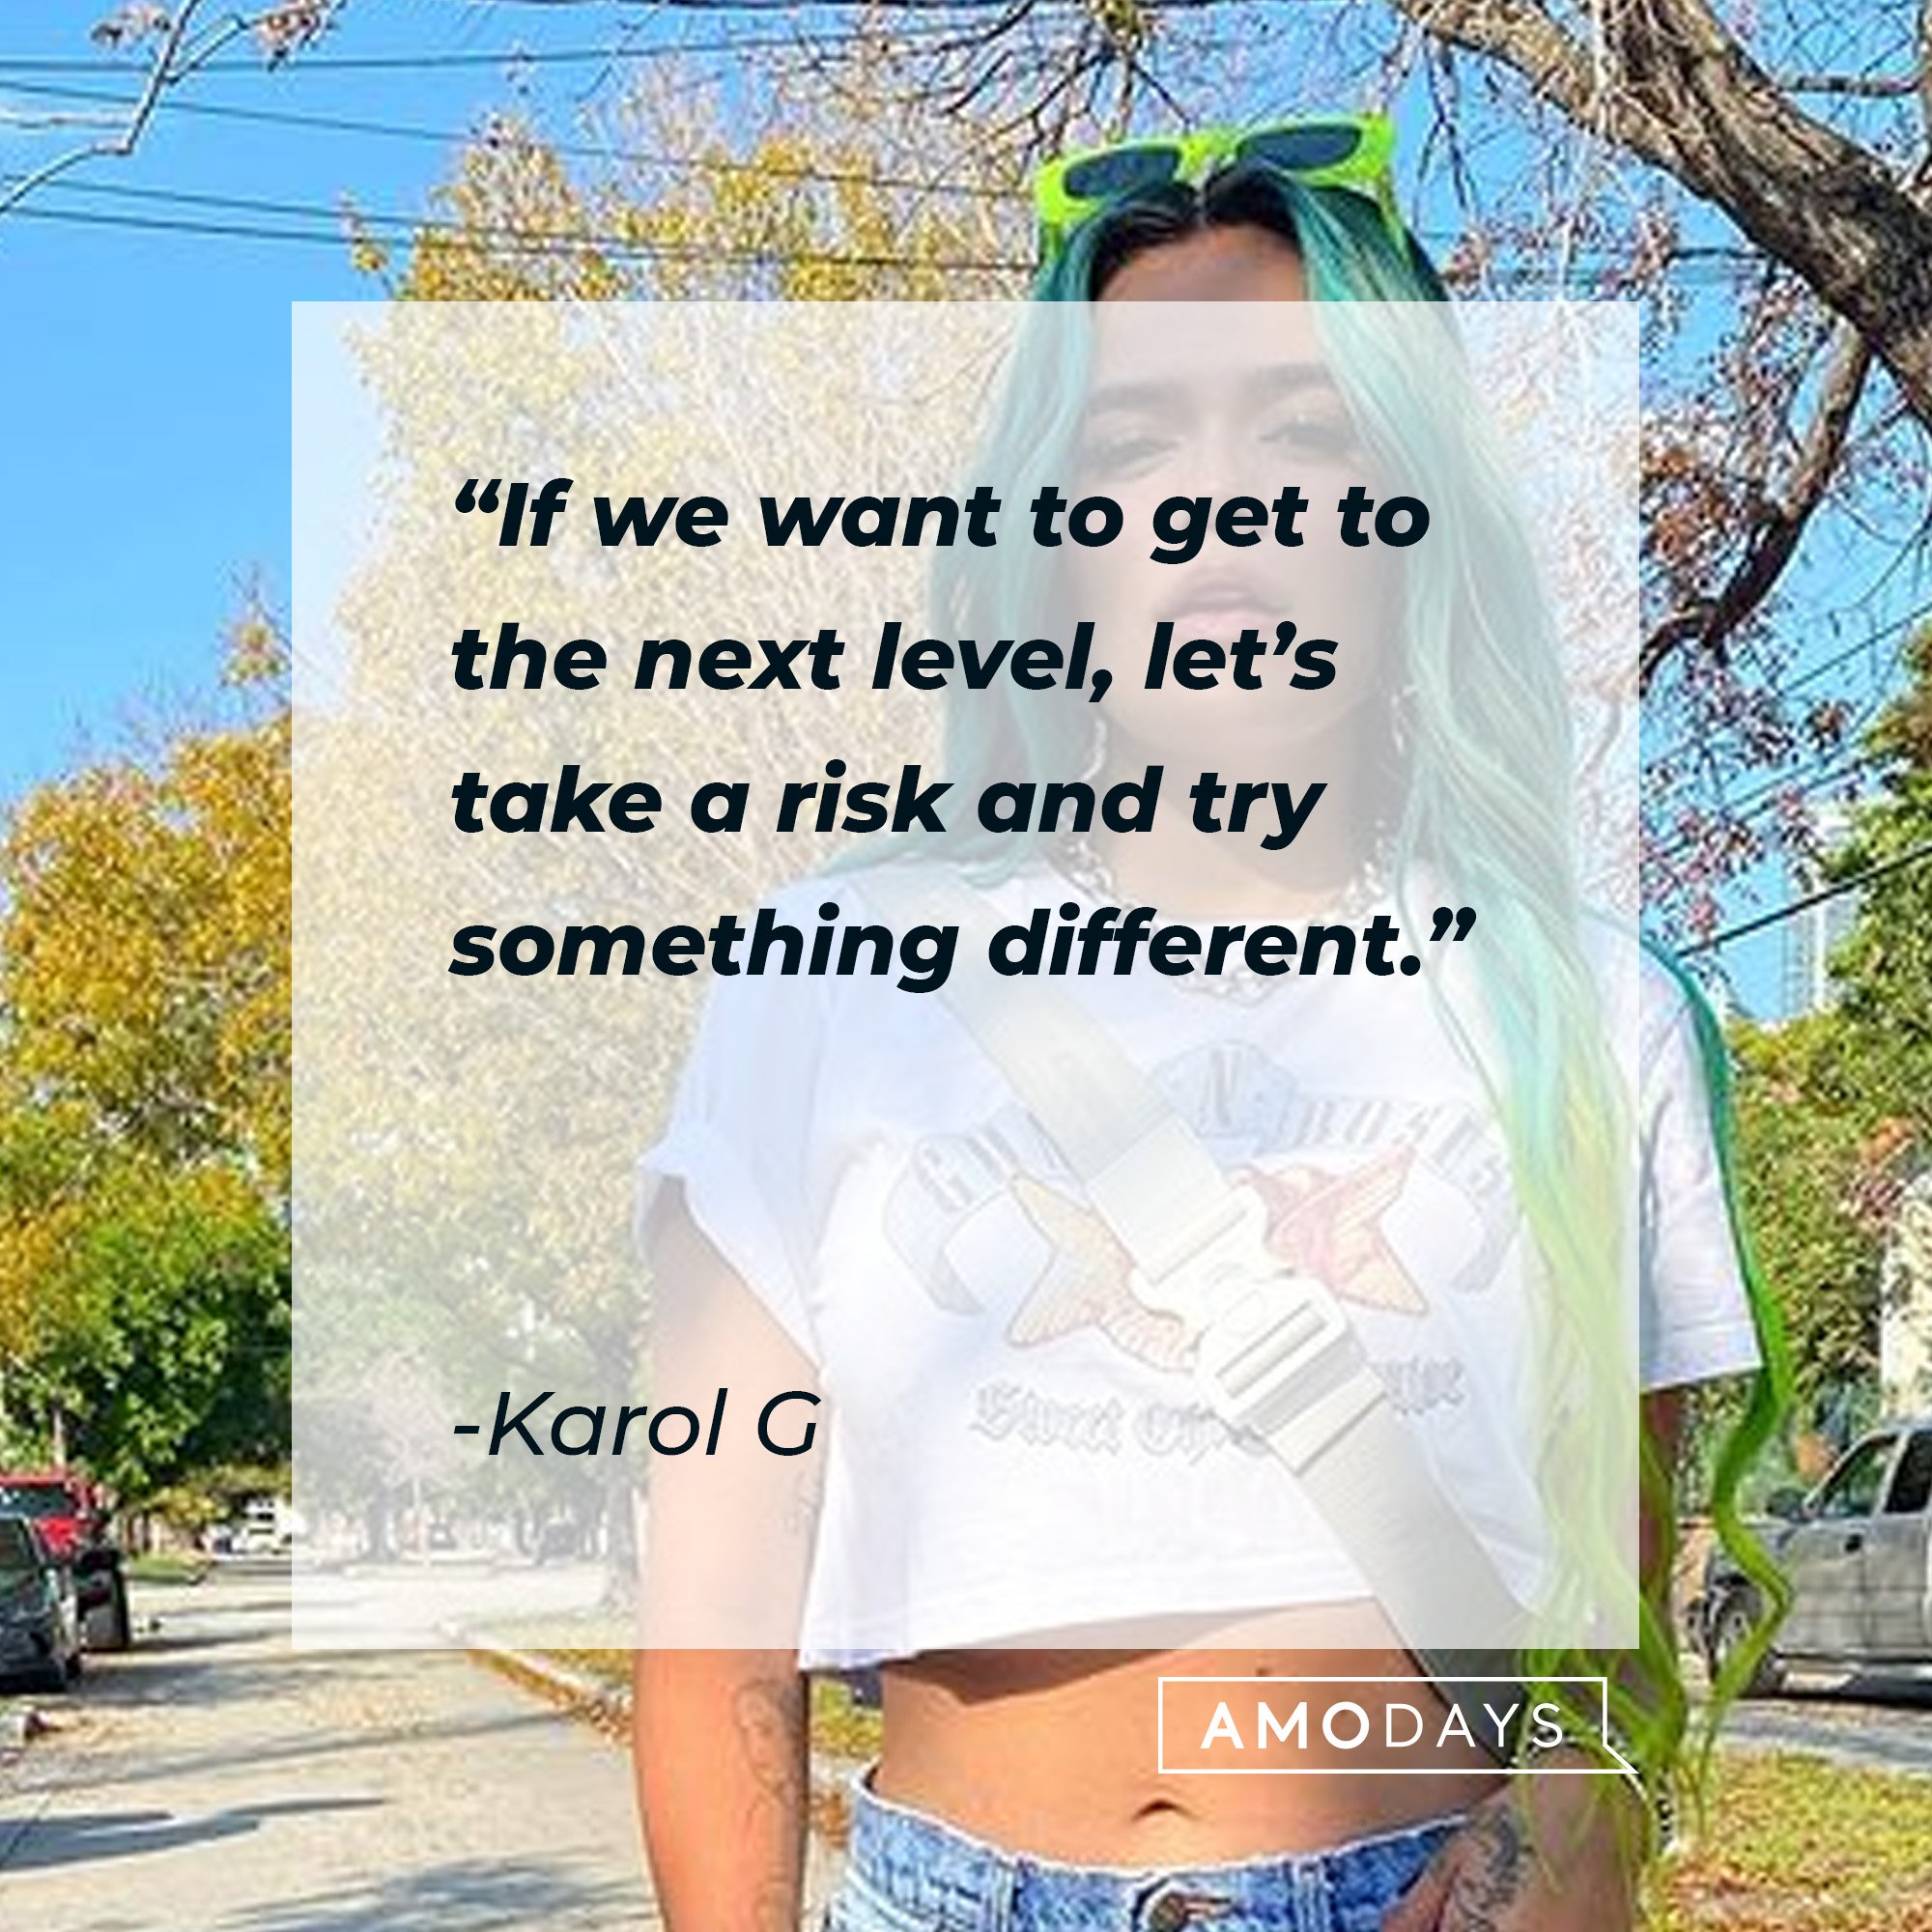 50 Karol G Quotes Pertaining to Her Life, Her Music, and Being a Woman